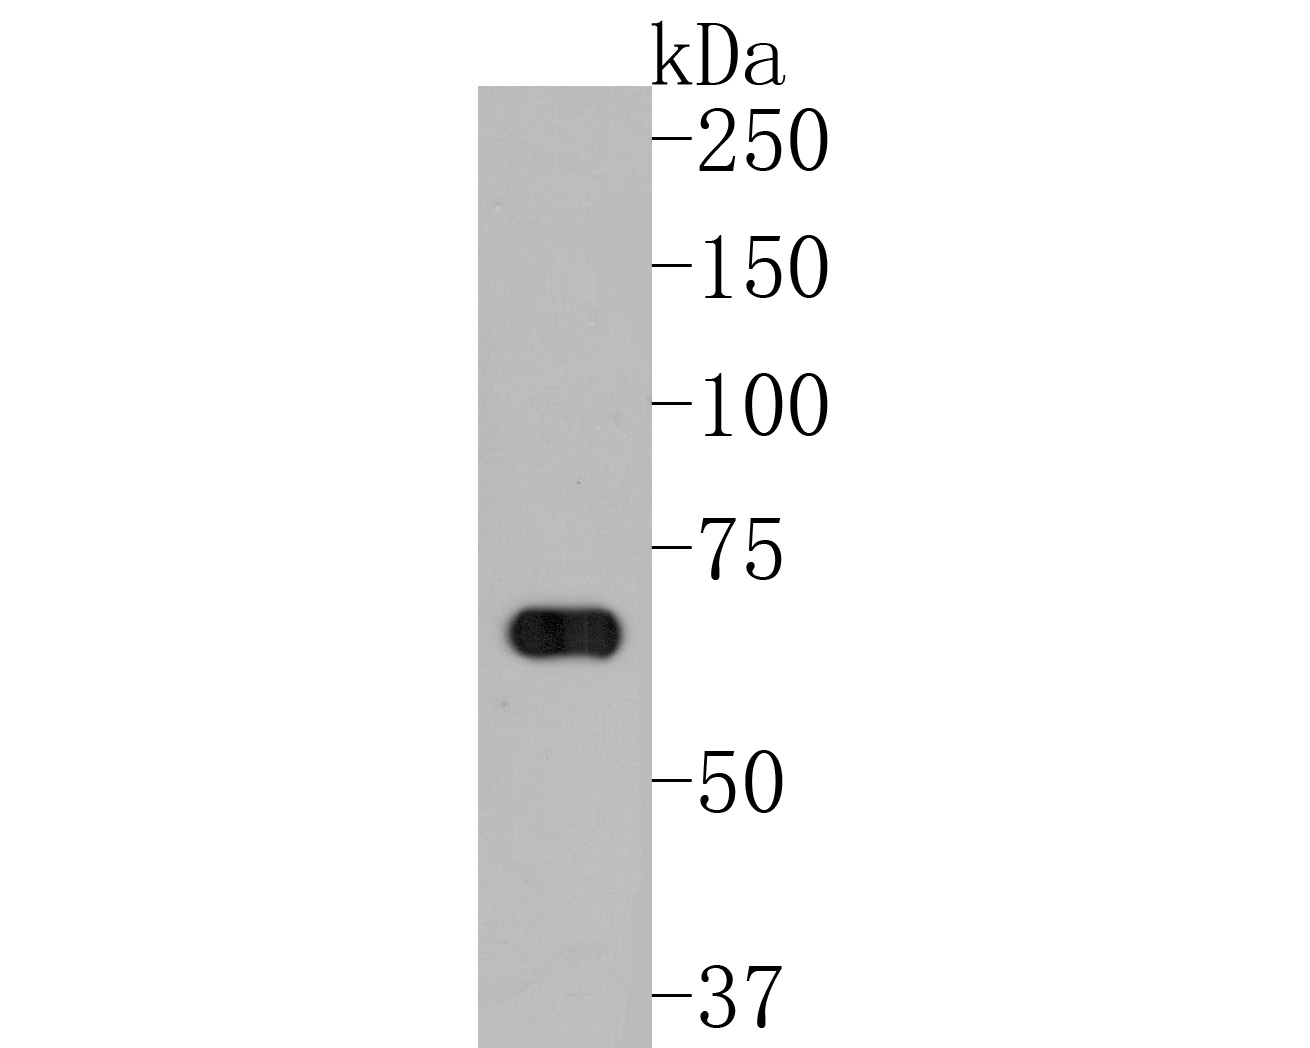 Western blot analysis of NEDD1 on mouse lung lysates. Proteins were transferred to a PVDF membrane and blocked with 5% NFDM/TBST for 1 hour at room temperature. The primary antibody (HA500294, 1/1,000) was used in 5% NFDM/TBST at room temperature for 2 hours. Goat Anti-Rabbit IgG - HRP Secondary Antibody (HA1001) at 1:200,000 dilution was used for 1 hour at room temperature.